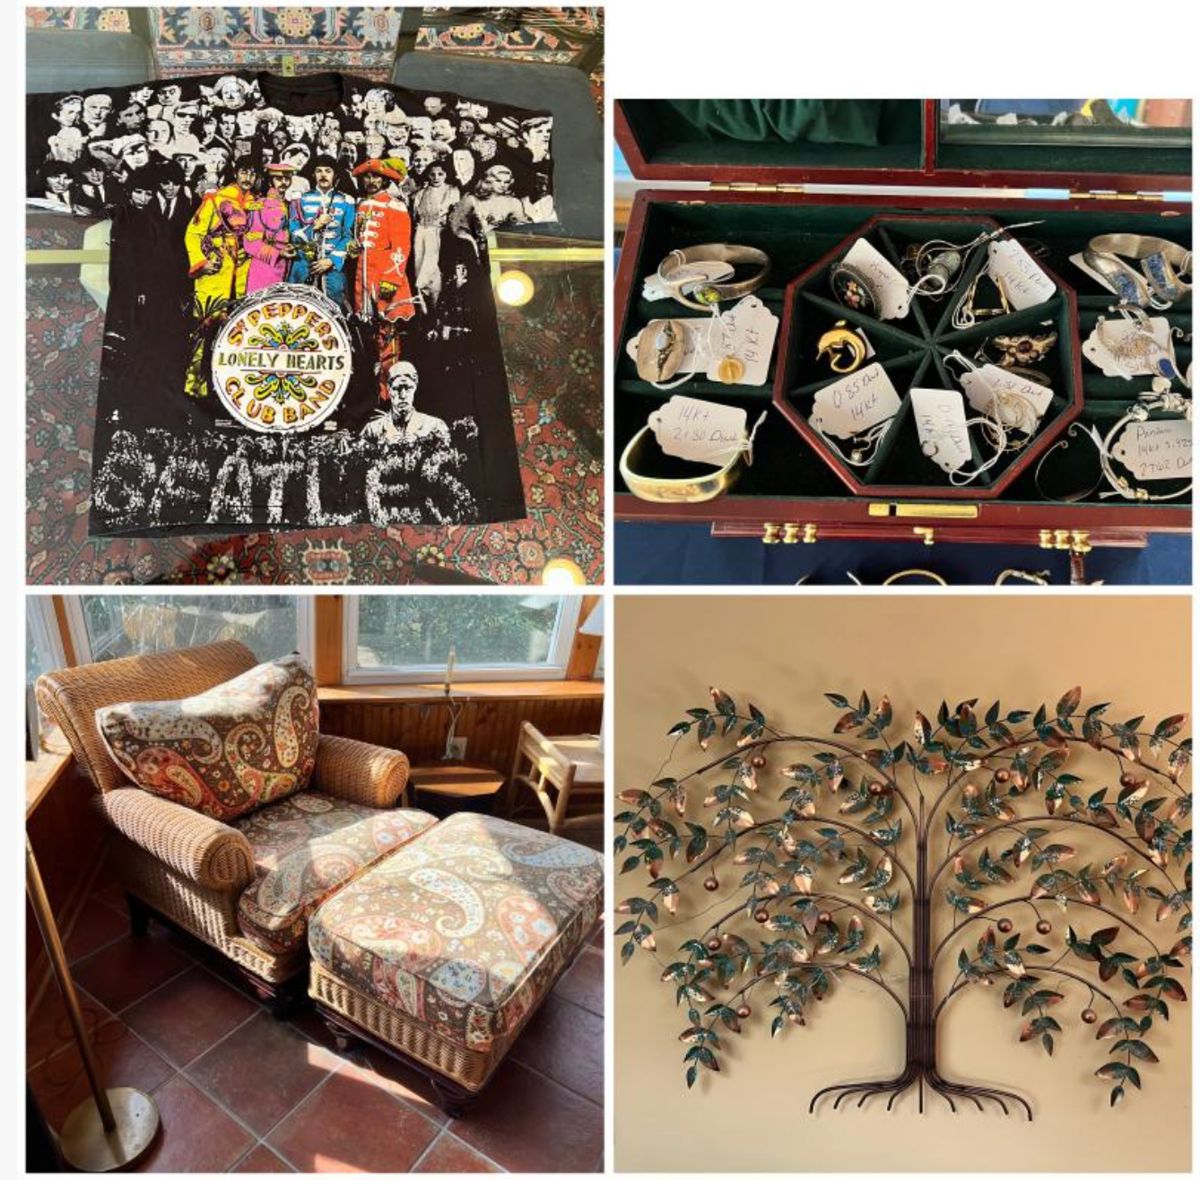 Vintage Clothing, Gold & Silver, MCM Home decor and furniture, collectibles, higher- end furniture, and so much more!